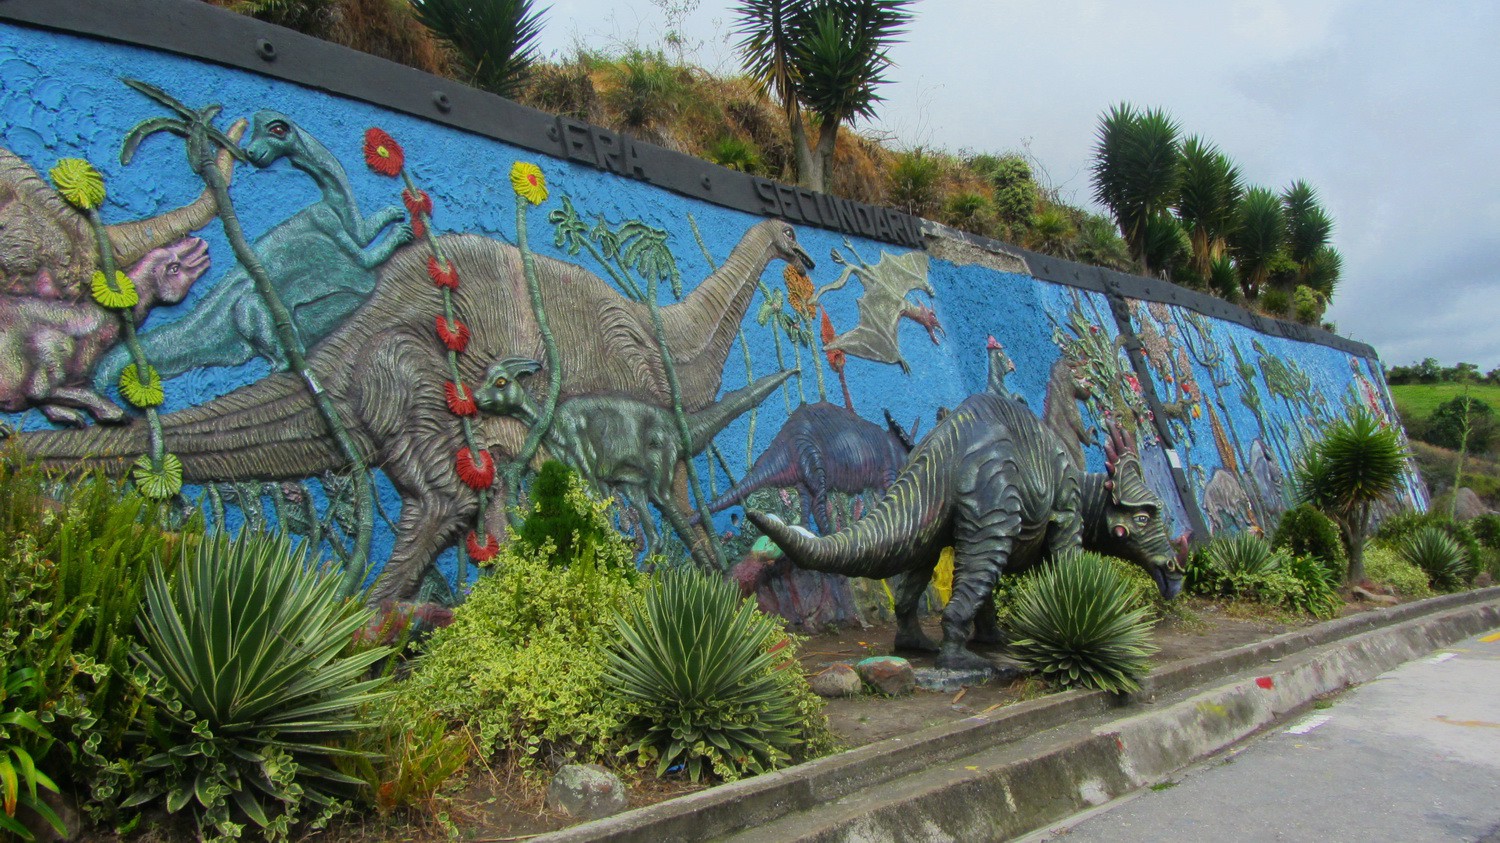 Dinsosaurs on the Panamerica close to Tulcan